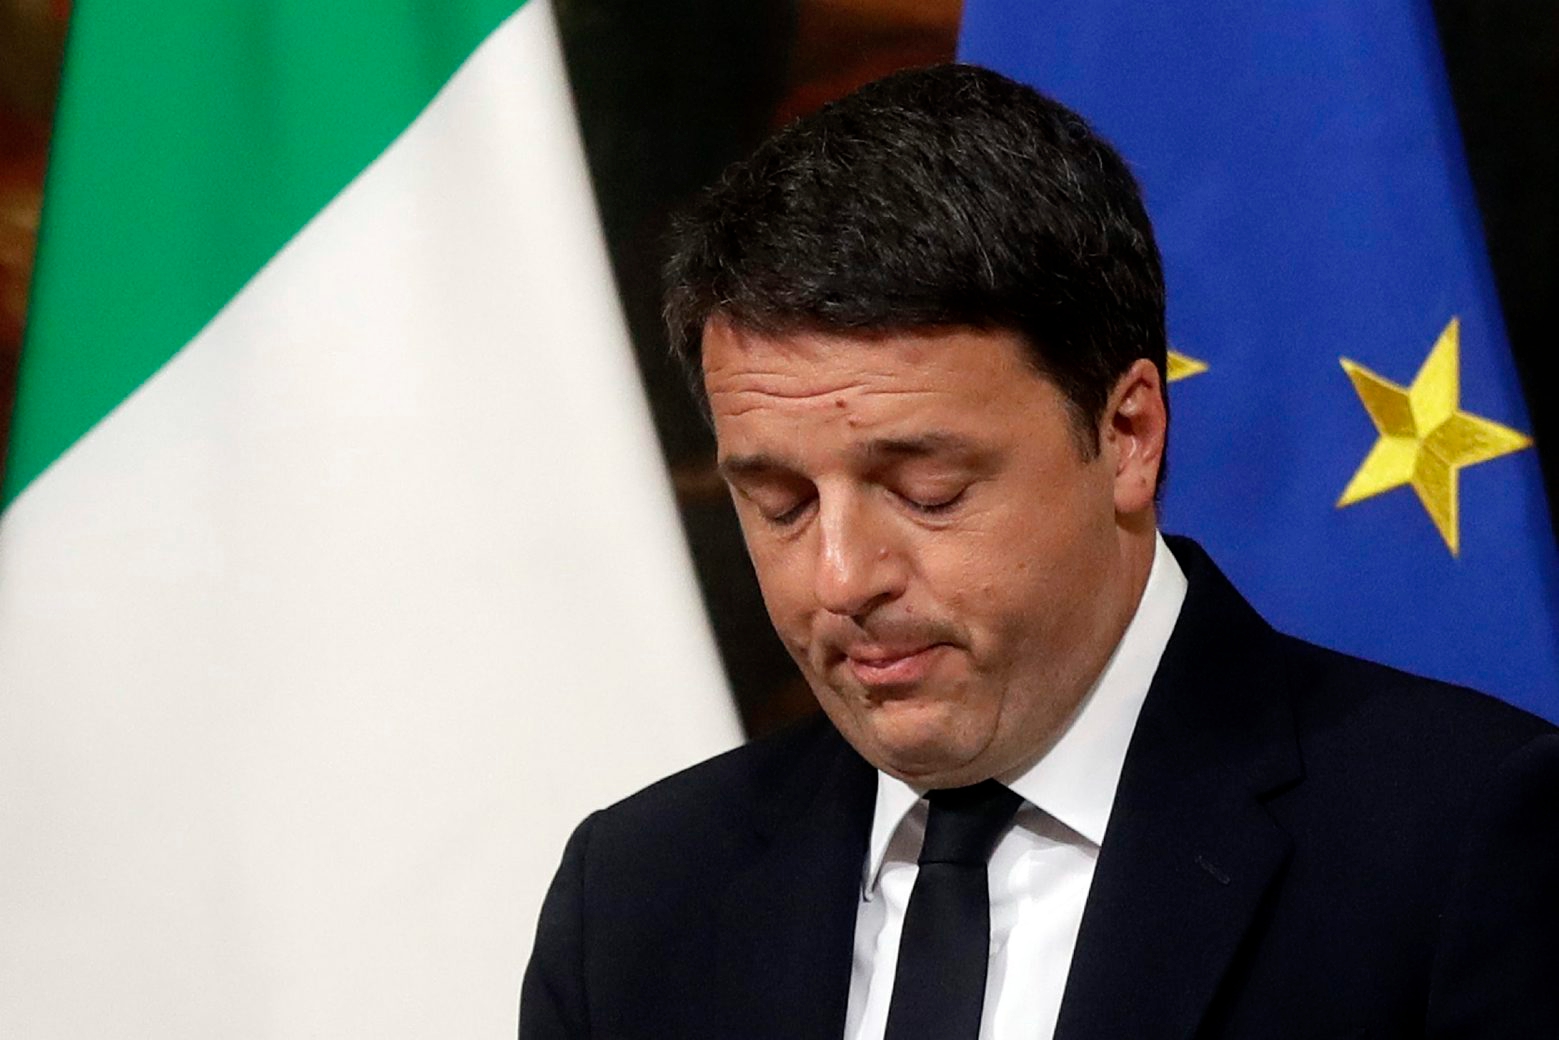 Italian Premier Matteo Renzi speaks during a press conference at the premier's office Chigi Palace in Rome, early Monday, Dec. 5, 2016. Renzi acknowledged defeat in a constitutional referendum and announced he will resign on Monday. Italians voted Sunday in a referendum on constitutional reforms that Premier Matteo Renzi has staked his political future on. (AP Photo/Gregorio Borgia) Italy Referendum